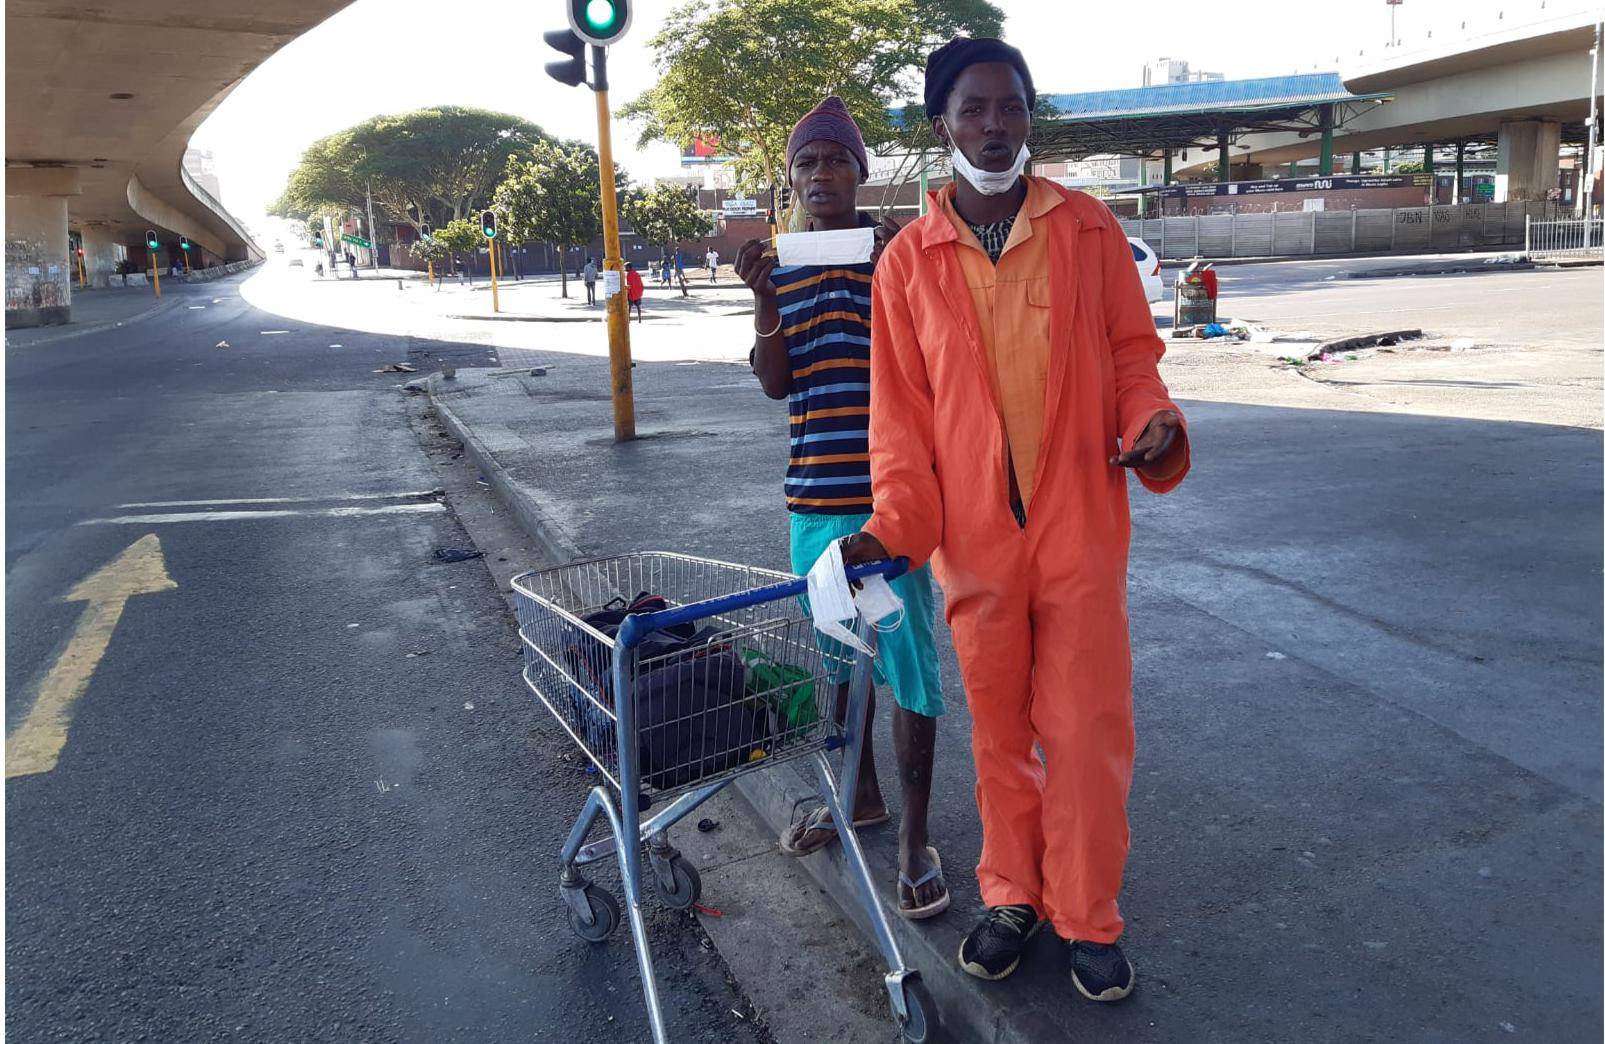 Ali and Bongani were hustling at Durban's Warwick Avenue taxi rank on Saturday, looking to make some money selling what looked like discarded face masks. Picture: Des Erasmus